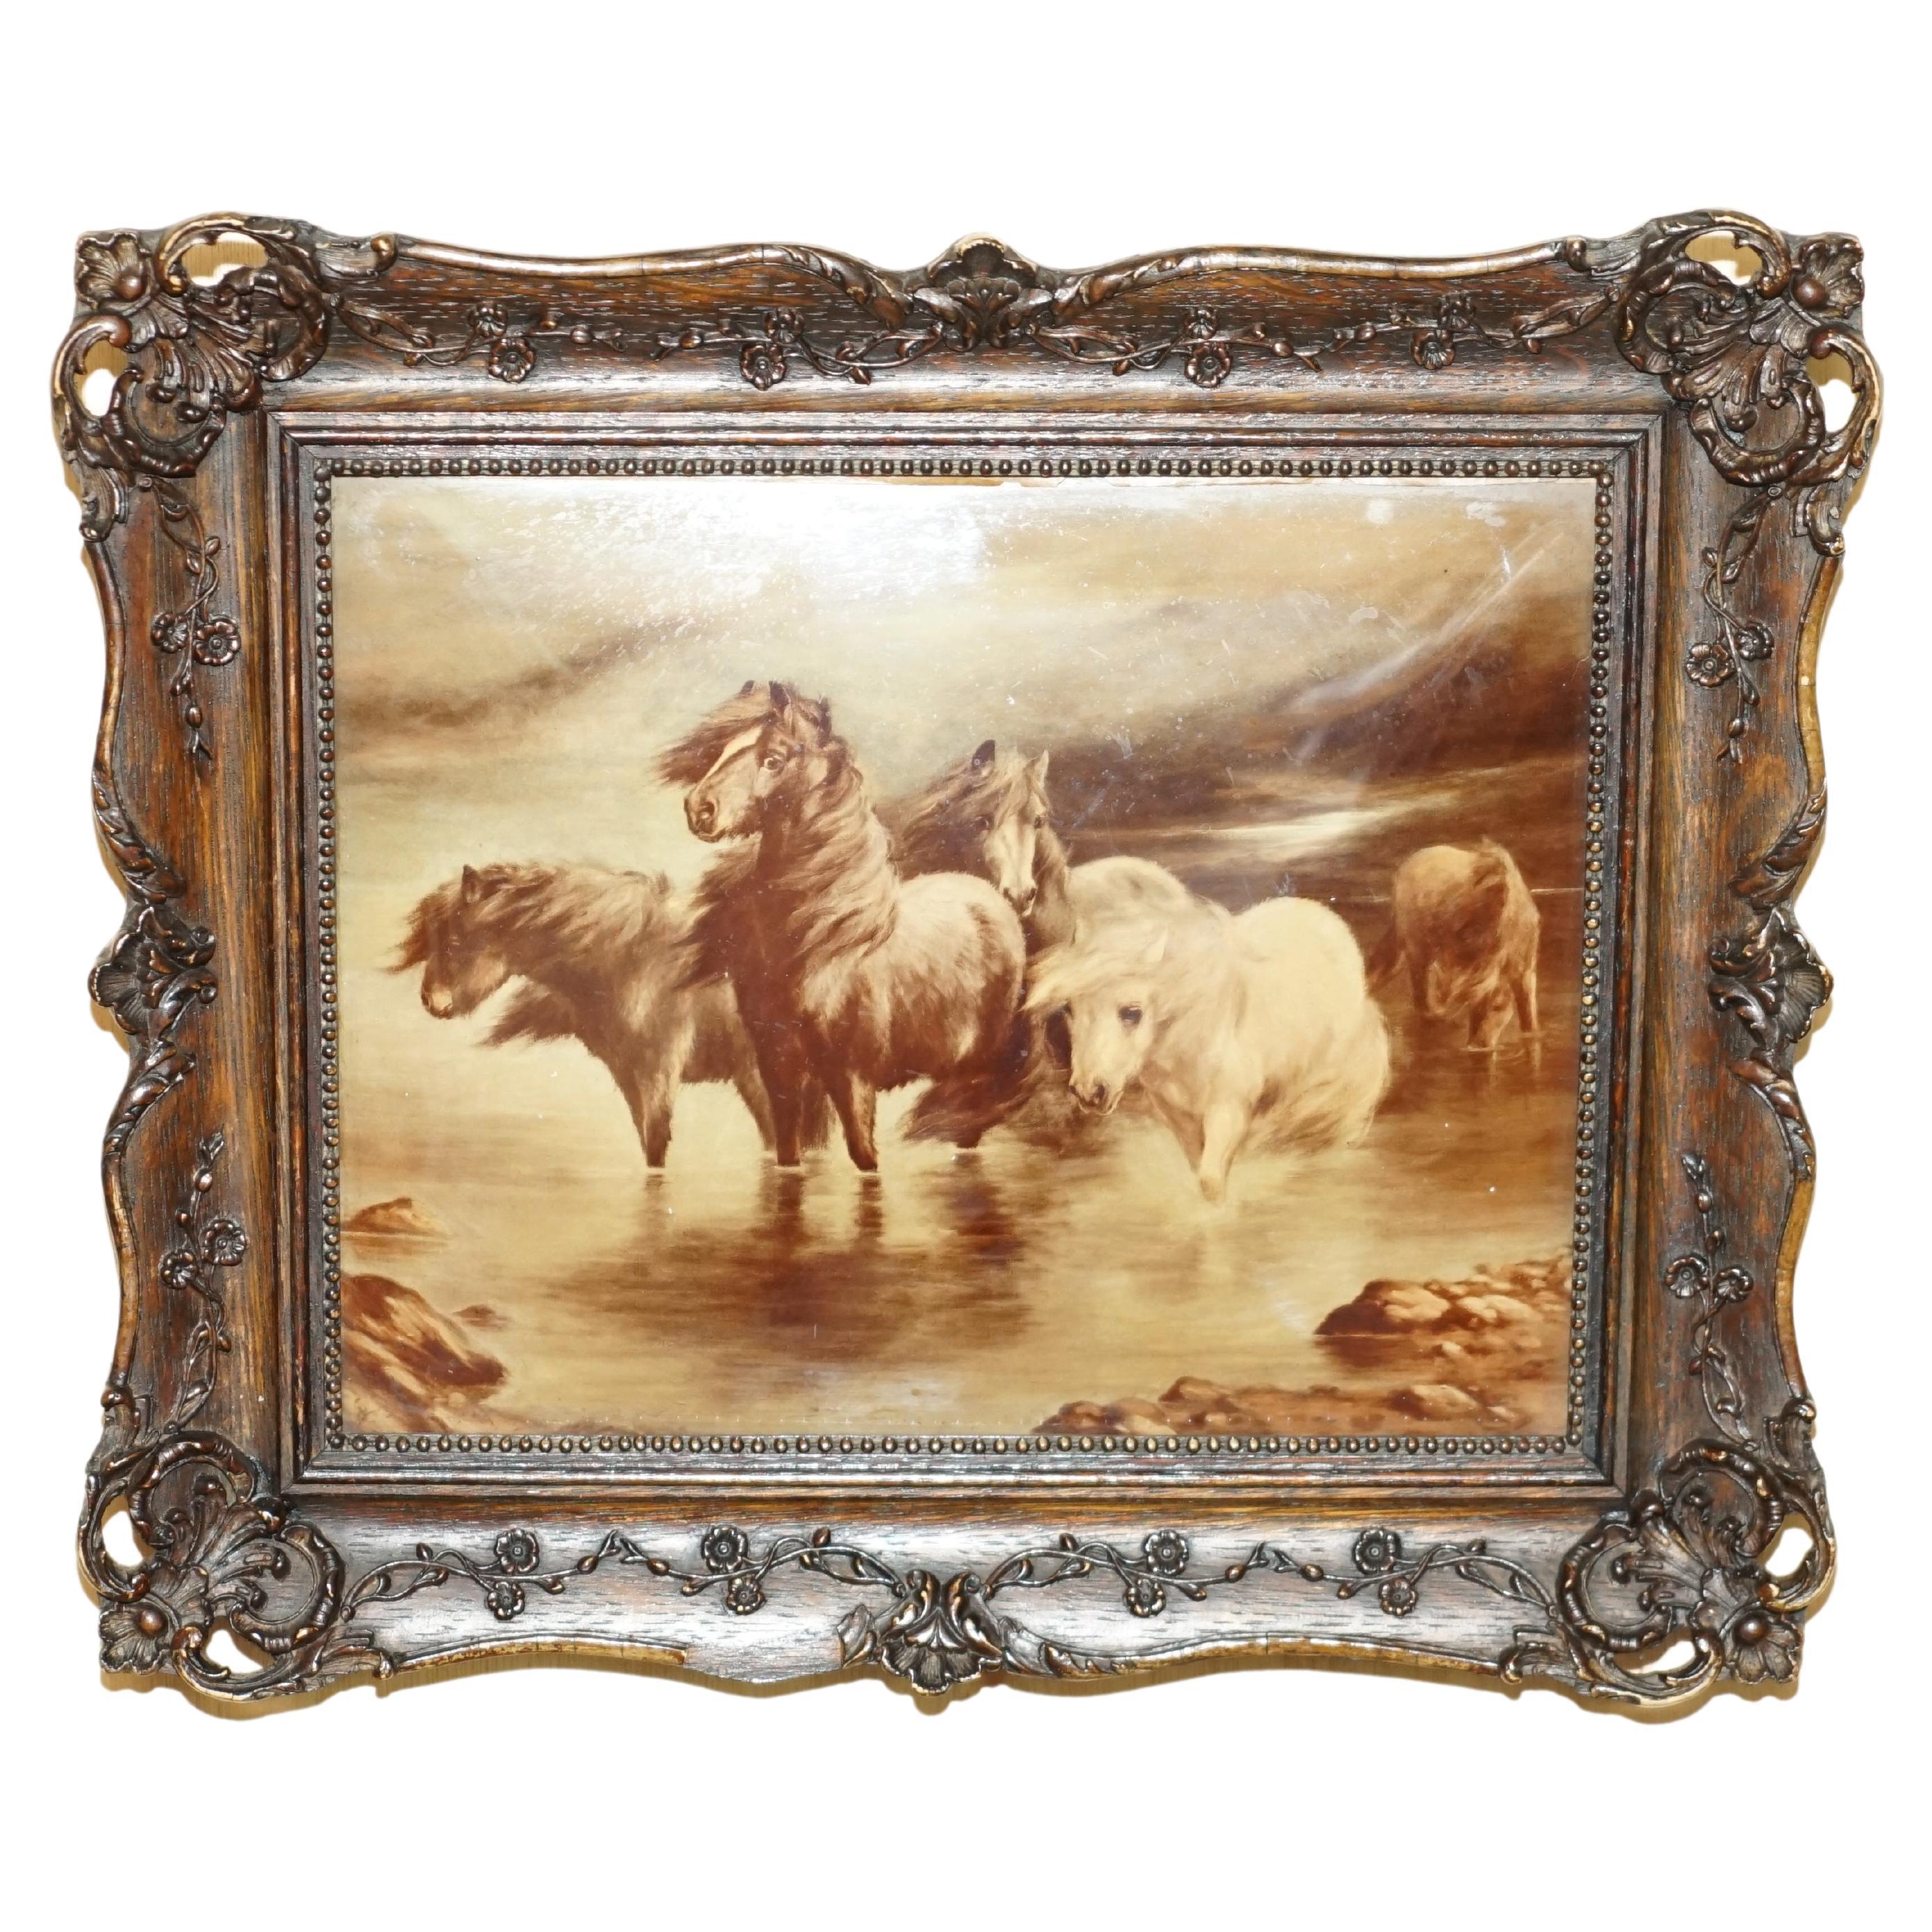 ONE OF TWO ANTiQUE CRYSTOLEUM HAND CARVED HARDWOOD FRAMED PICTURES OF HORSES